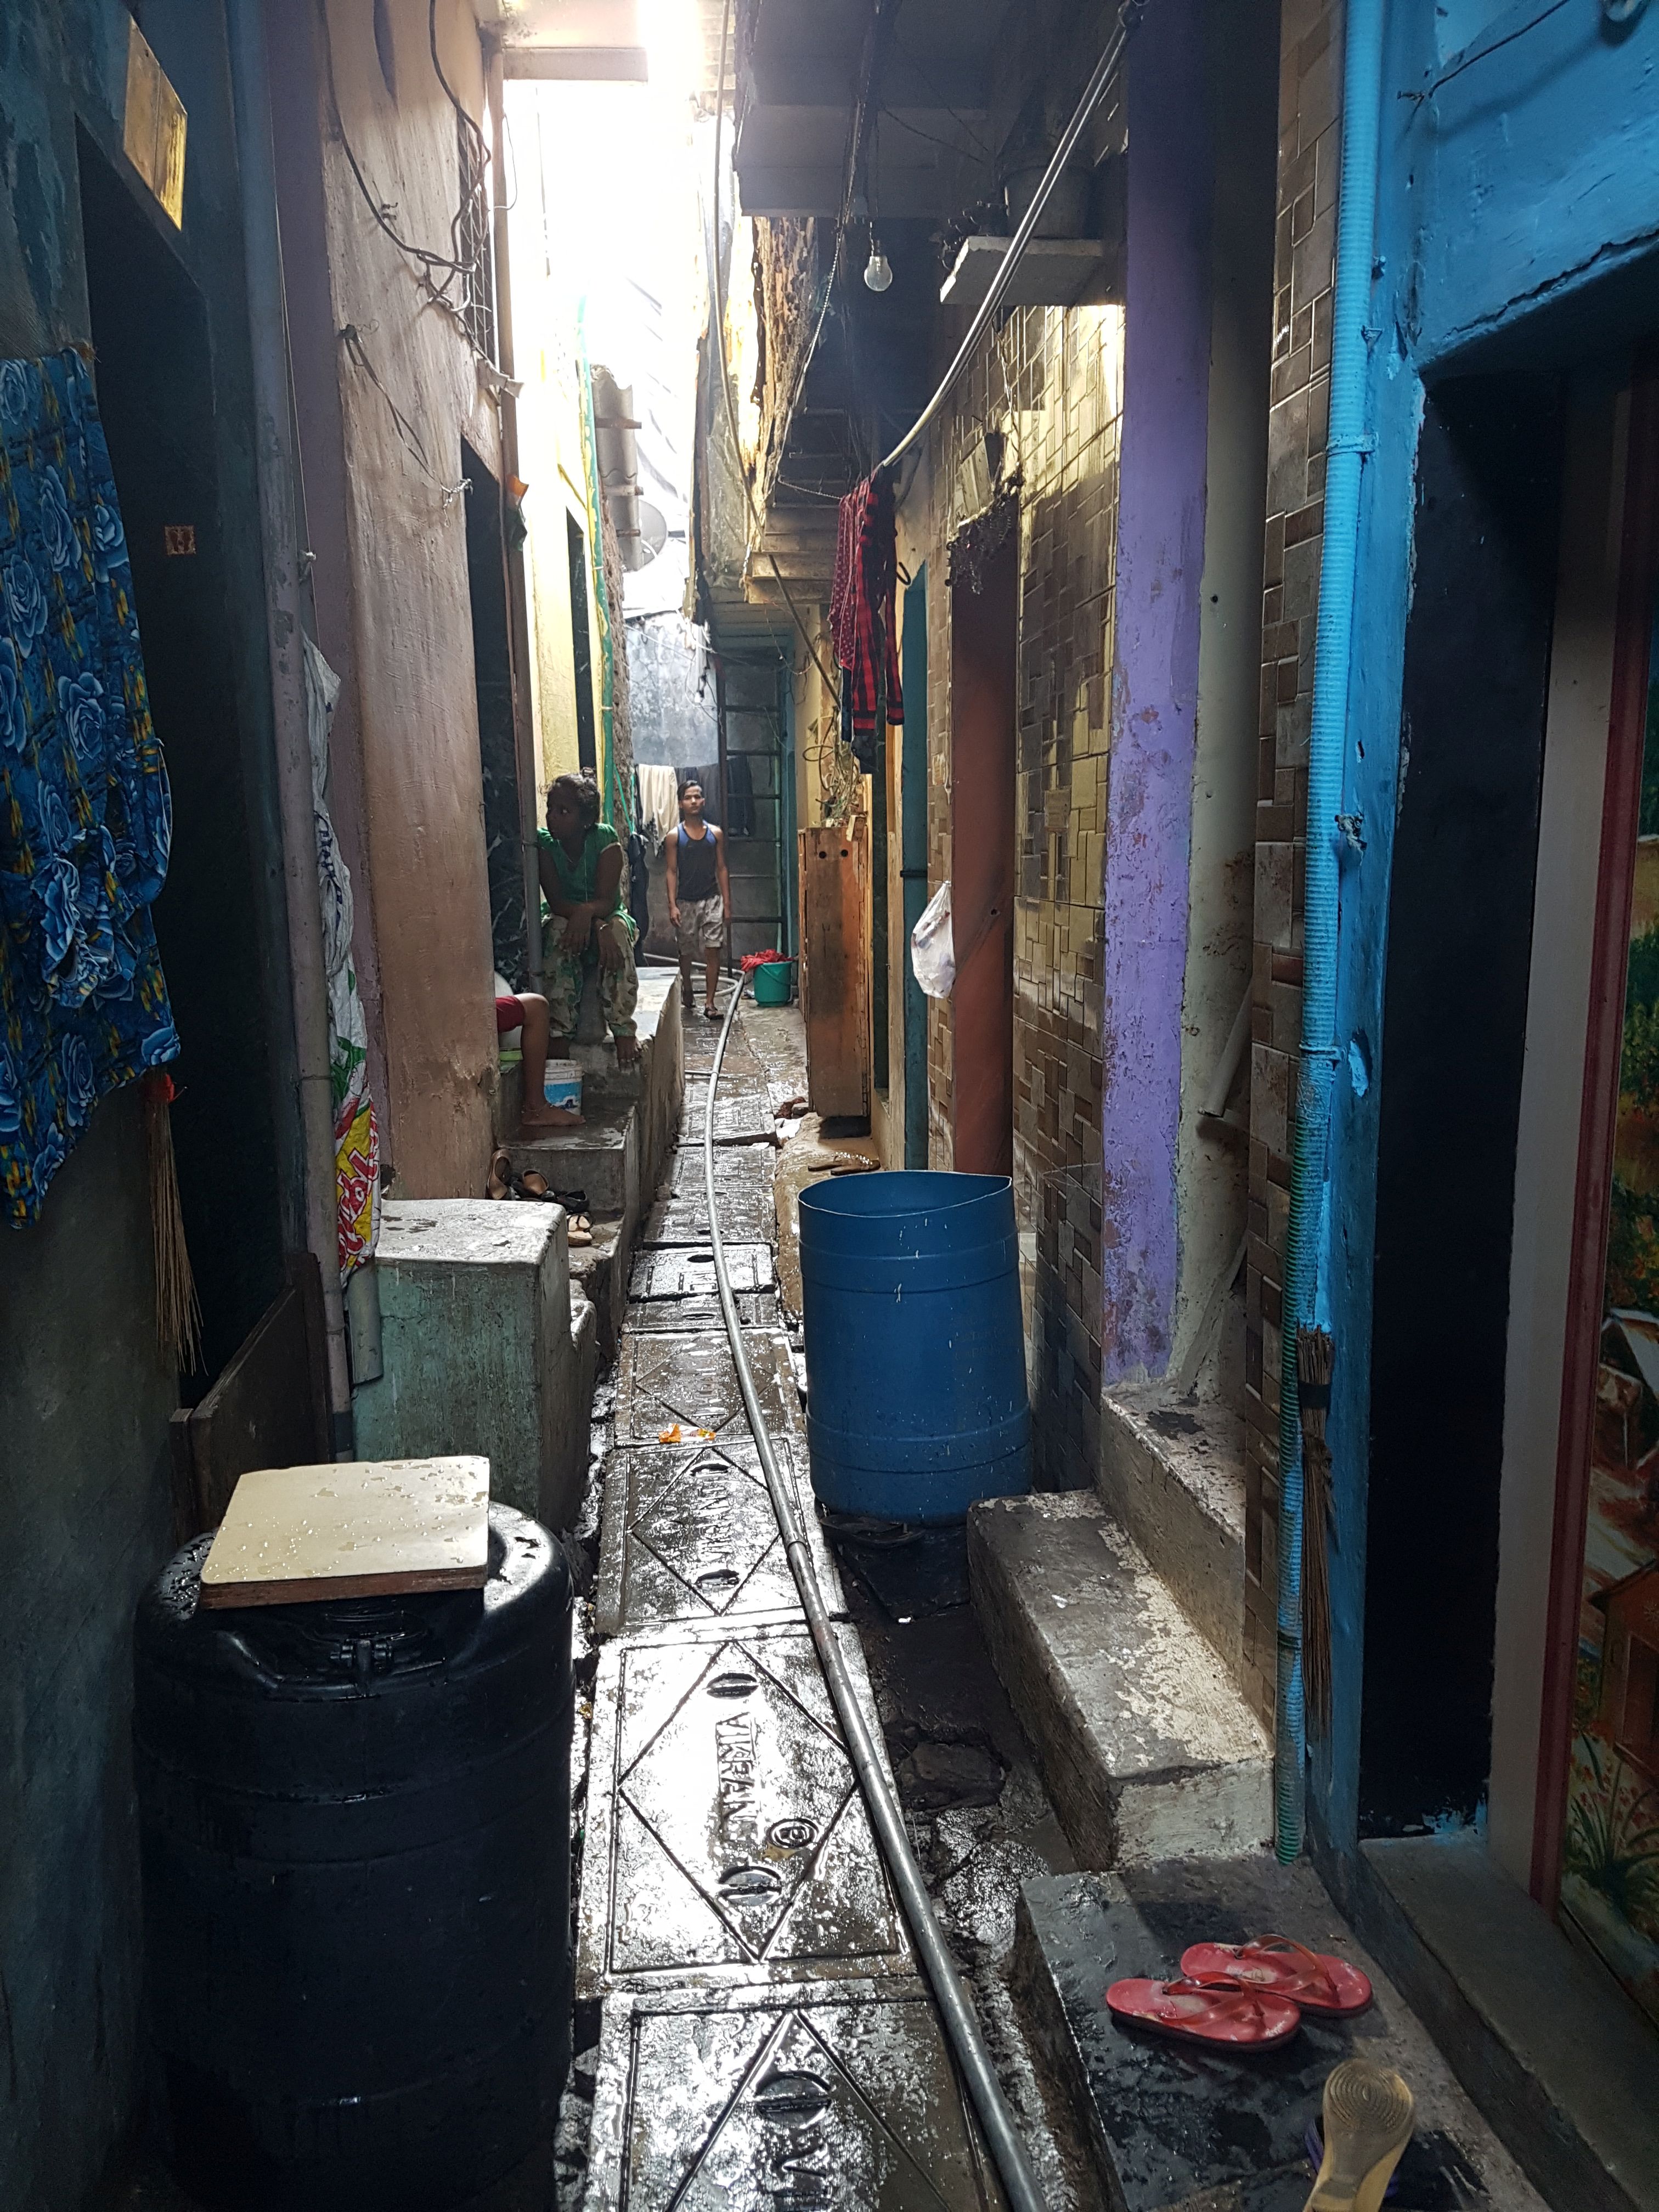 An unending stretch of narrow lanes, open sewers and cramped houses (Image: Pratima Kishore)